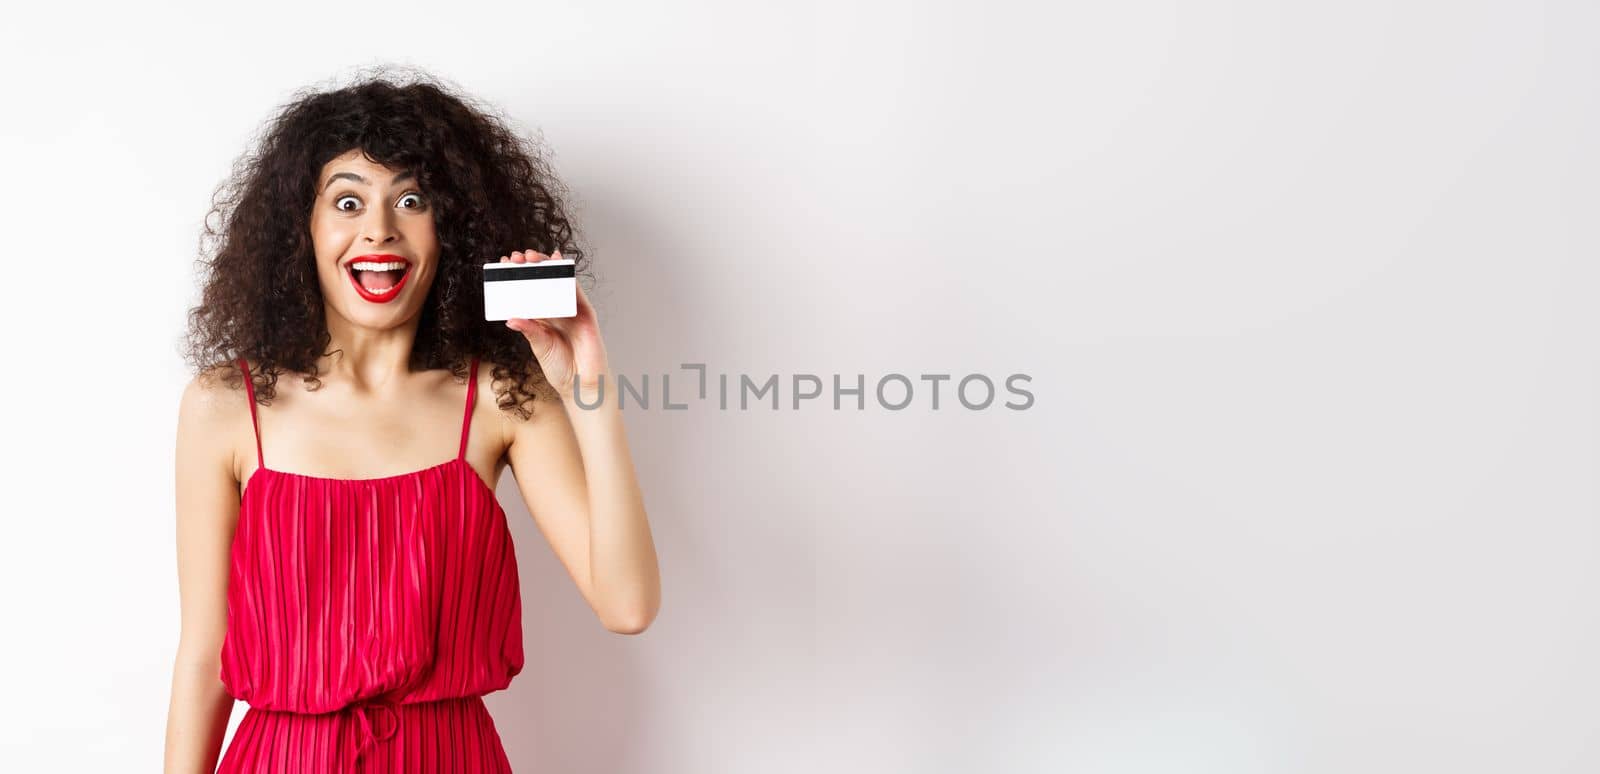 Excited smiling woman in red dress, showing plastic credit card and looking happy, standing over white background. Copy space